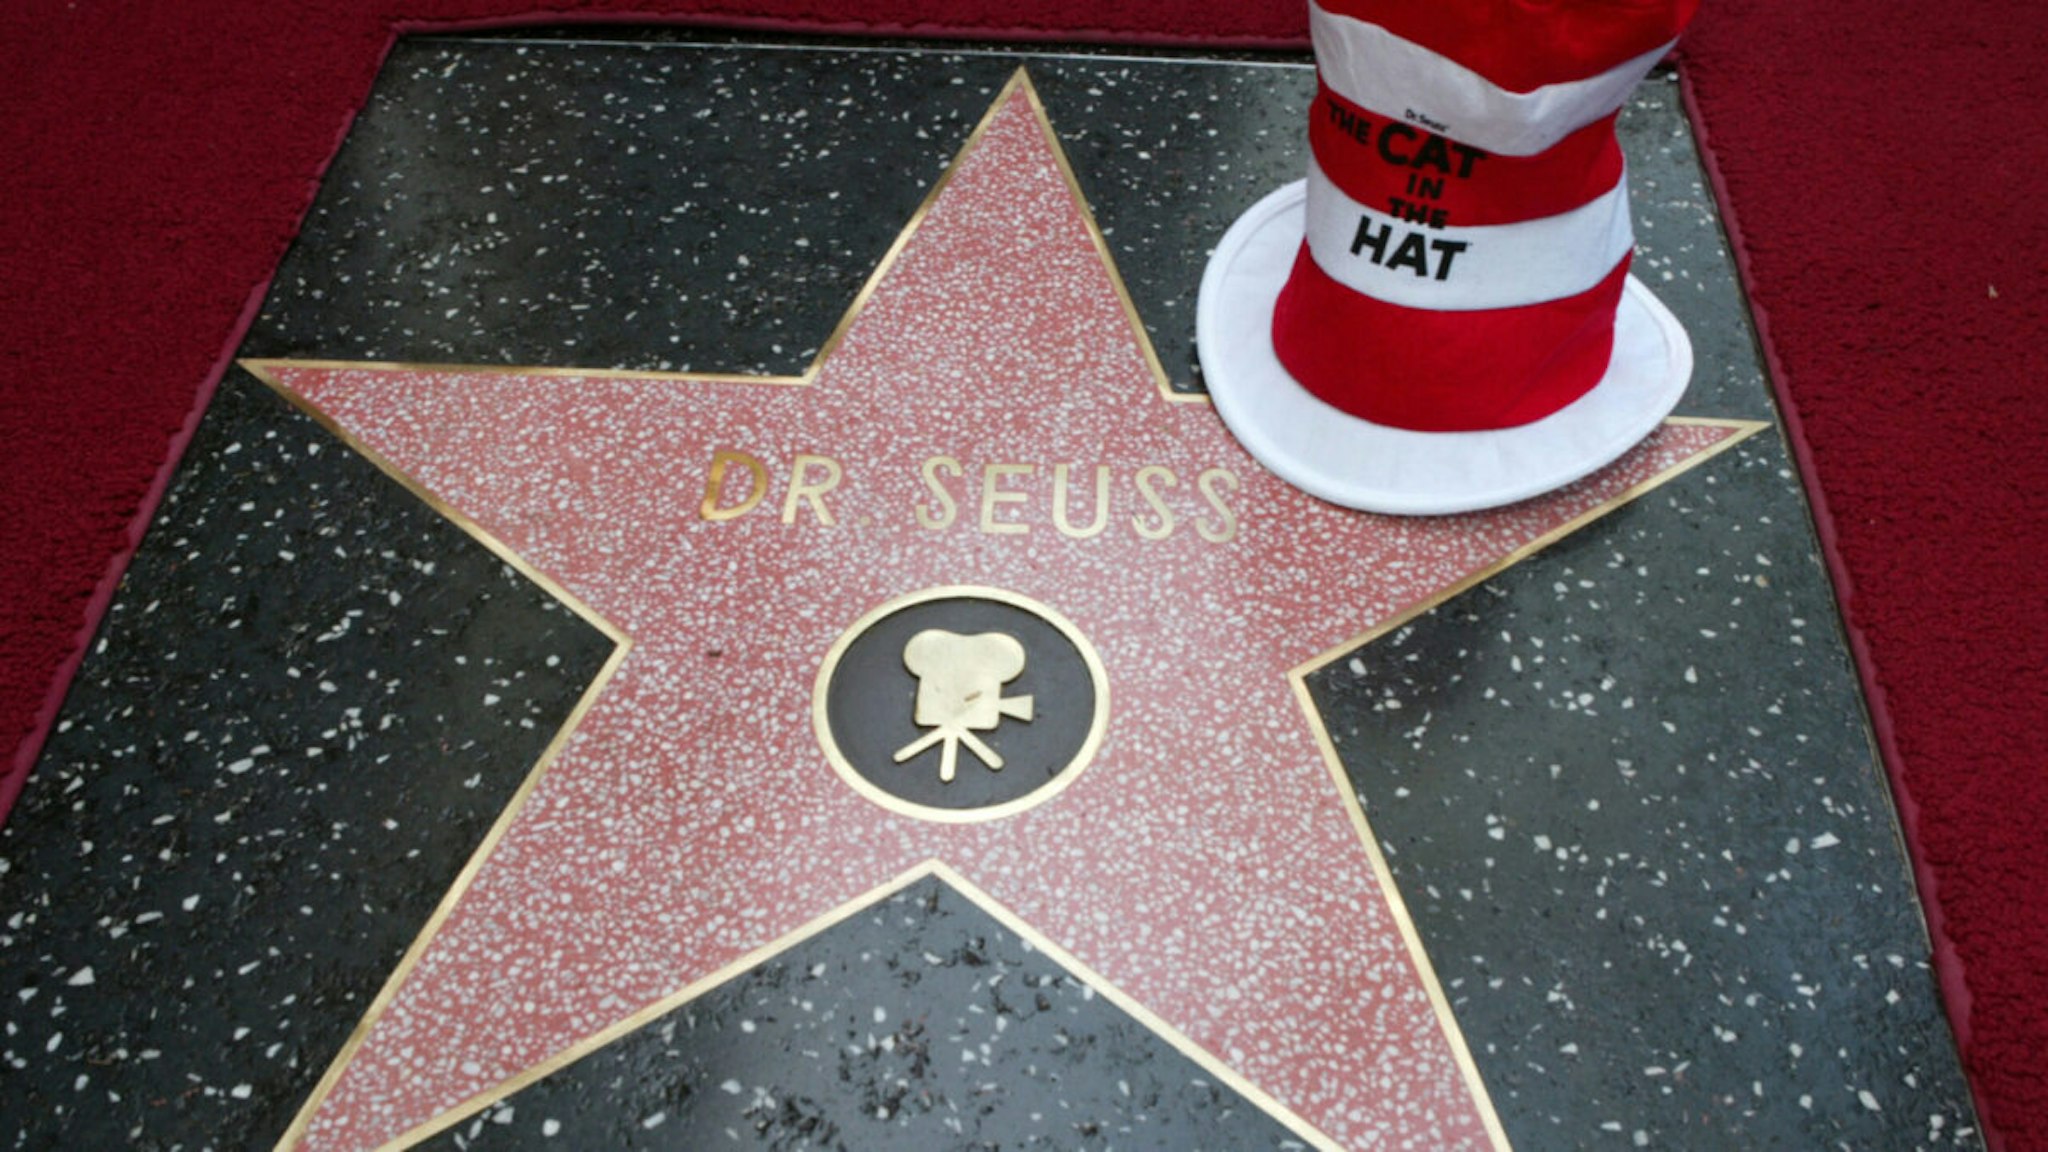 Dr. Seuss Star during Theodor "Dr. Seuss" Geisel Honored Posthumously with Star on Hollywood Walk of Fame at Hollywood Blvd. in Hollywood, California, United States.